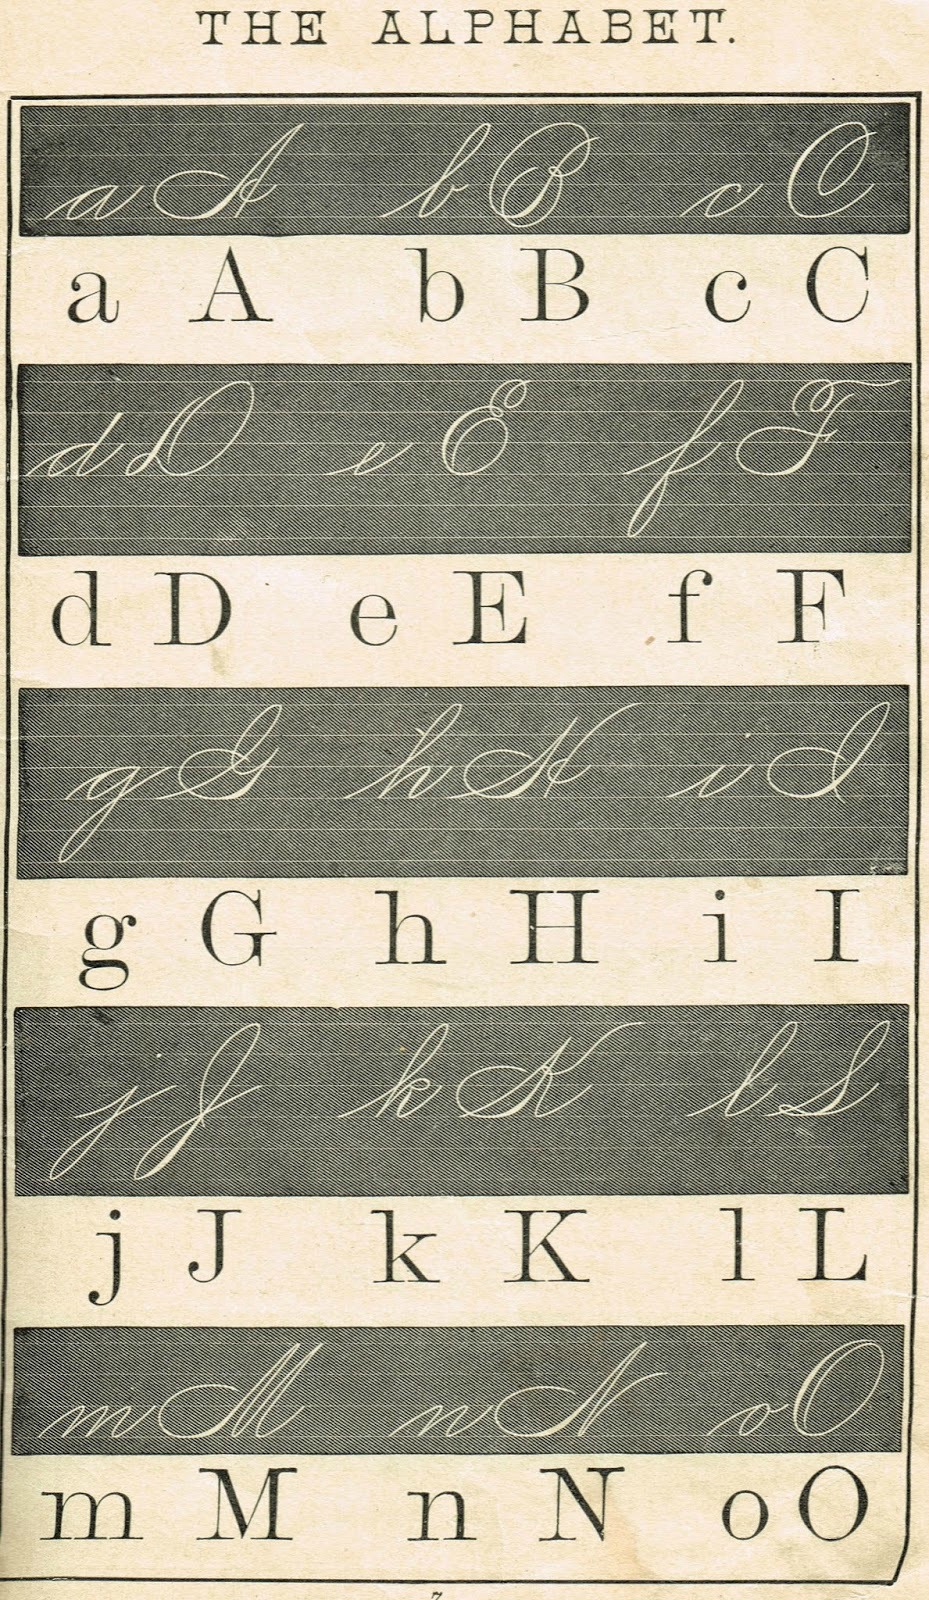 1800's Alphabet School Primer Page - Royalty Free Printable Antique Graphics Knick of Time | www.knickoftime.net